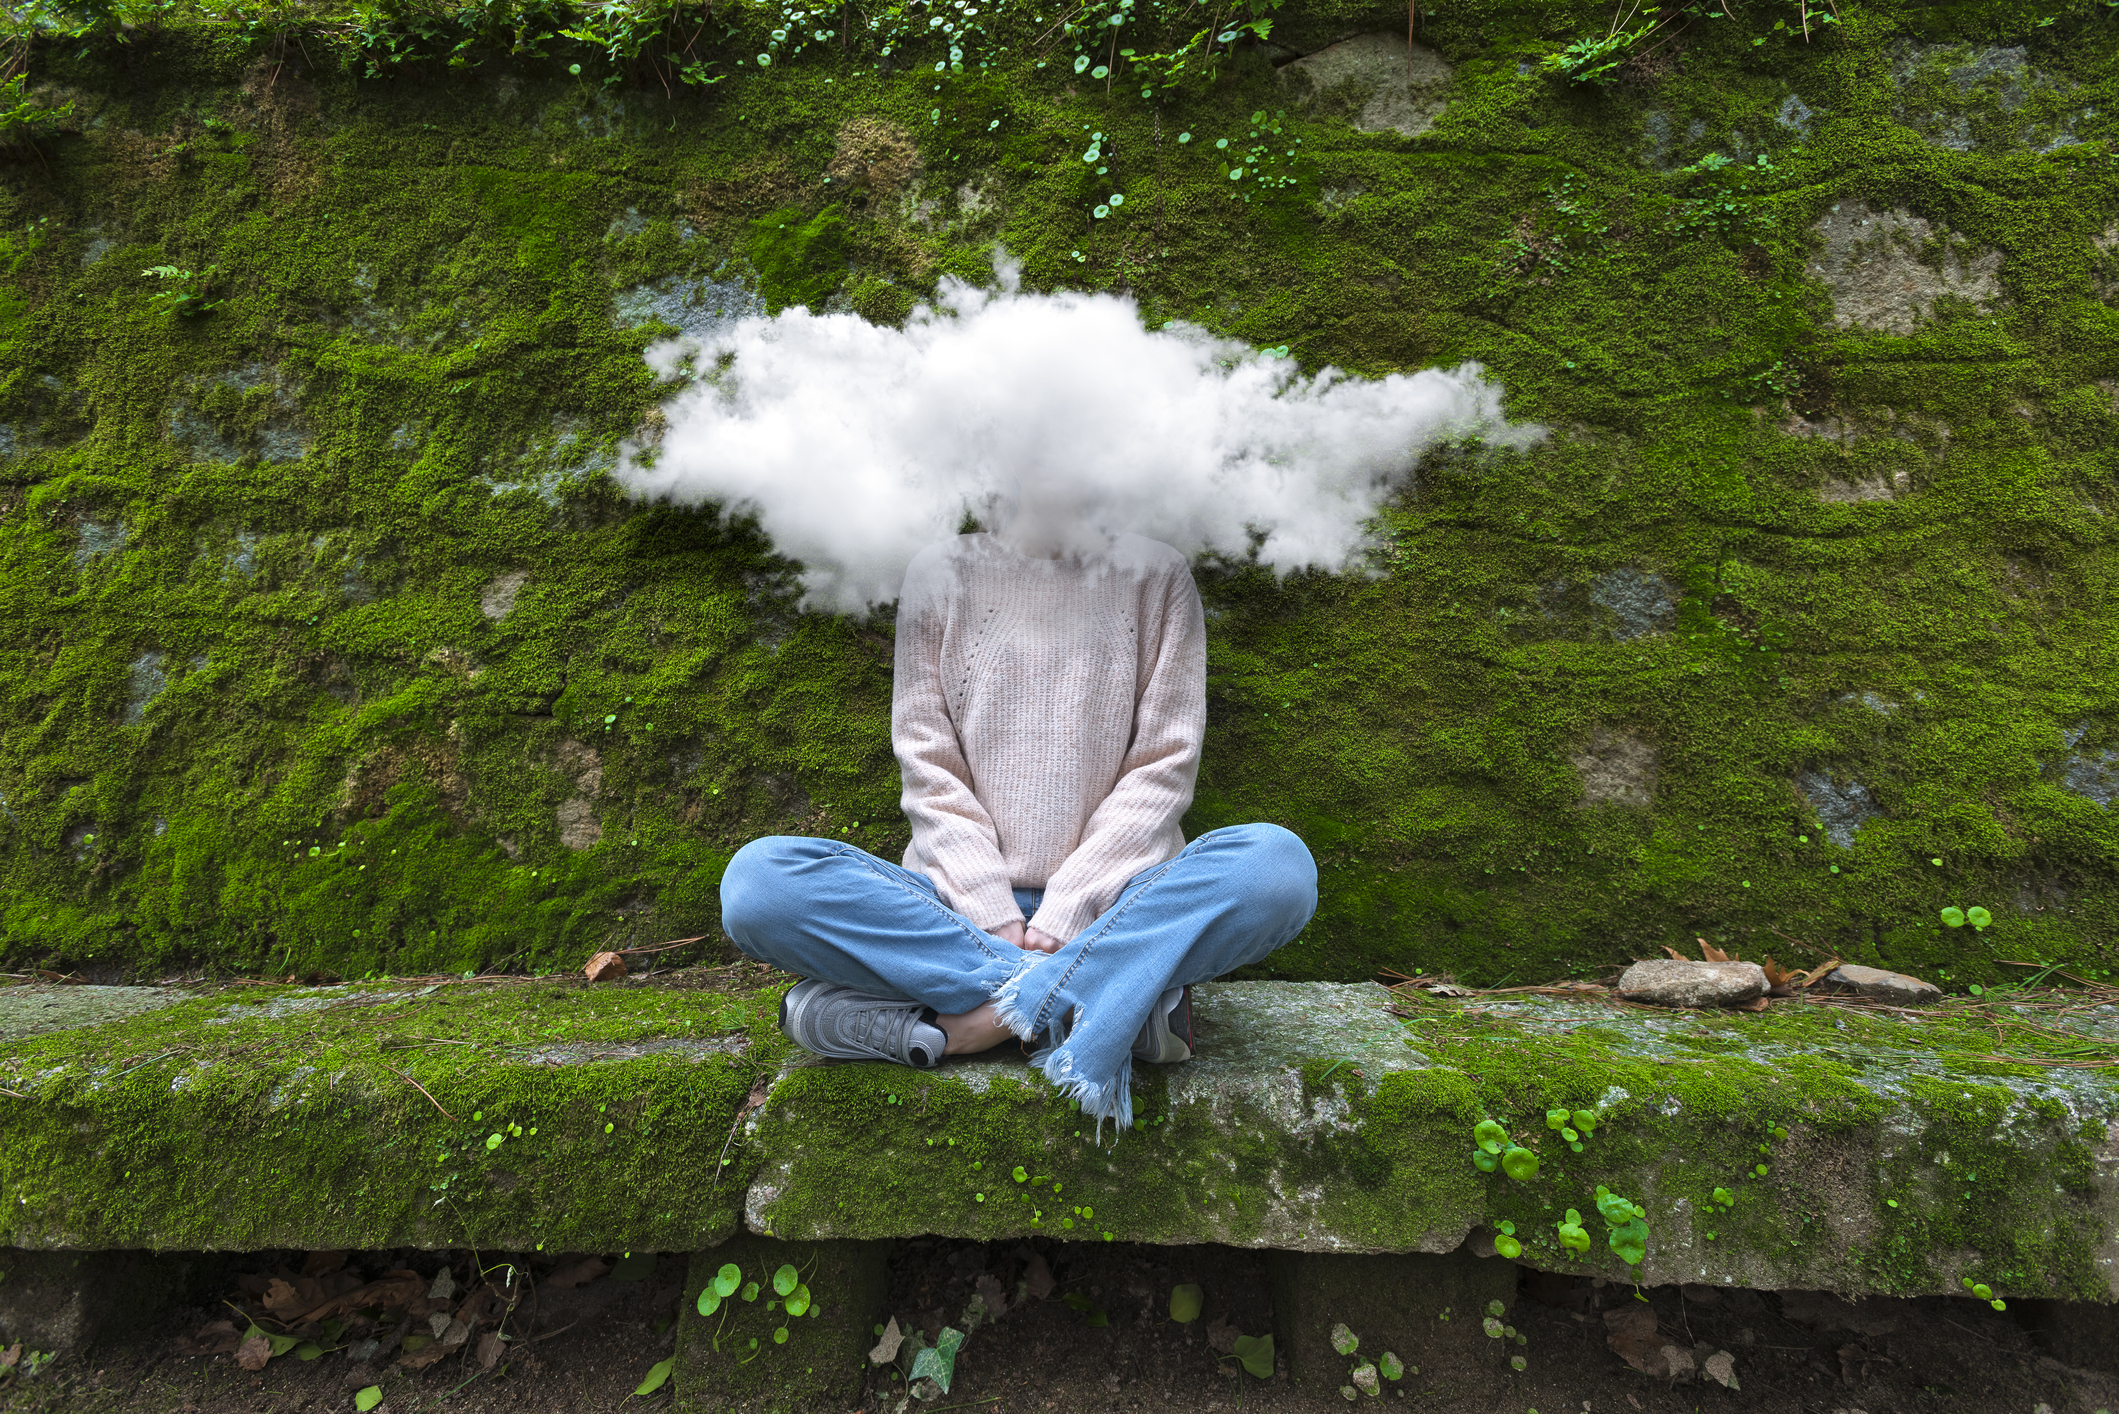 A person sitting cross-legged on a bench in nature, but with a cloud over where their head should be